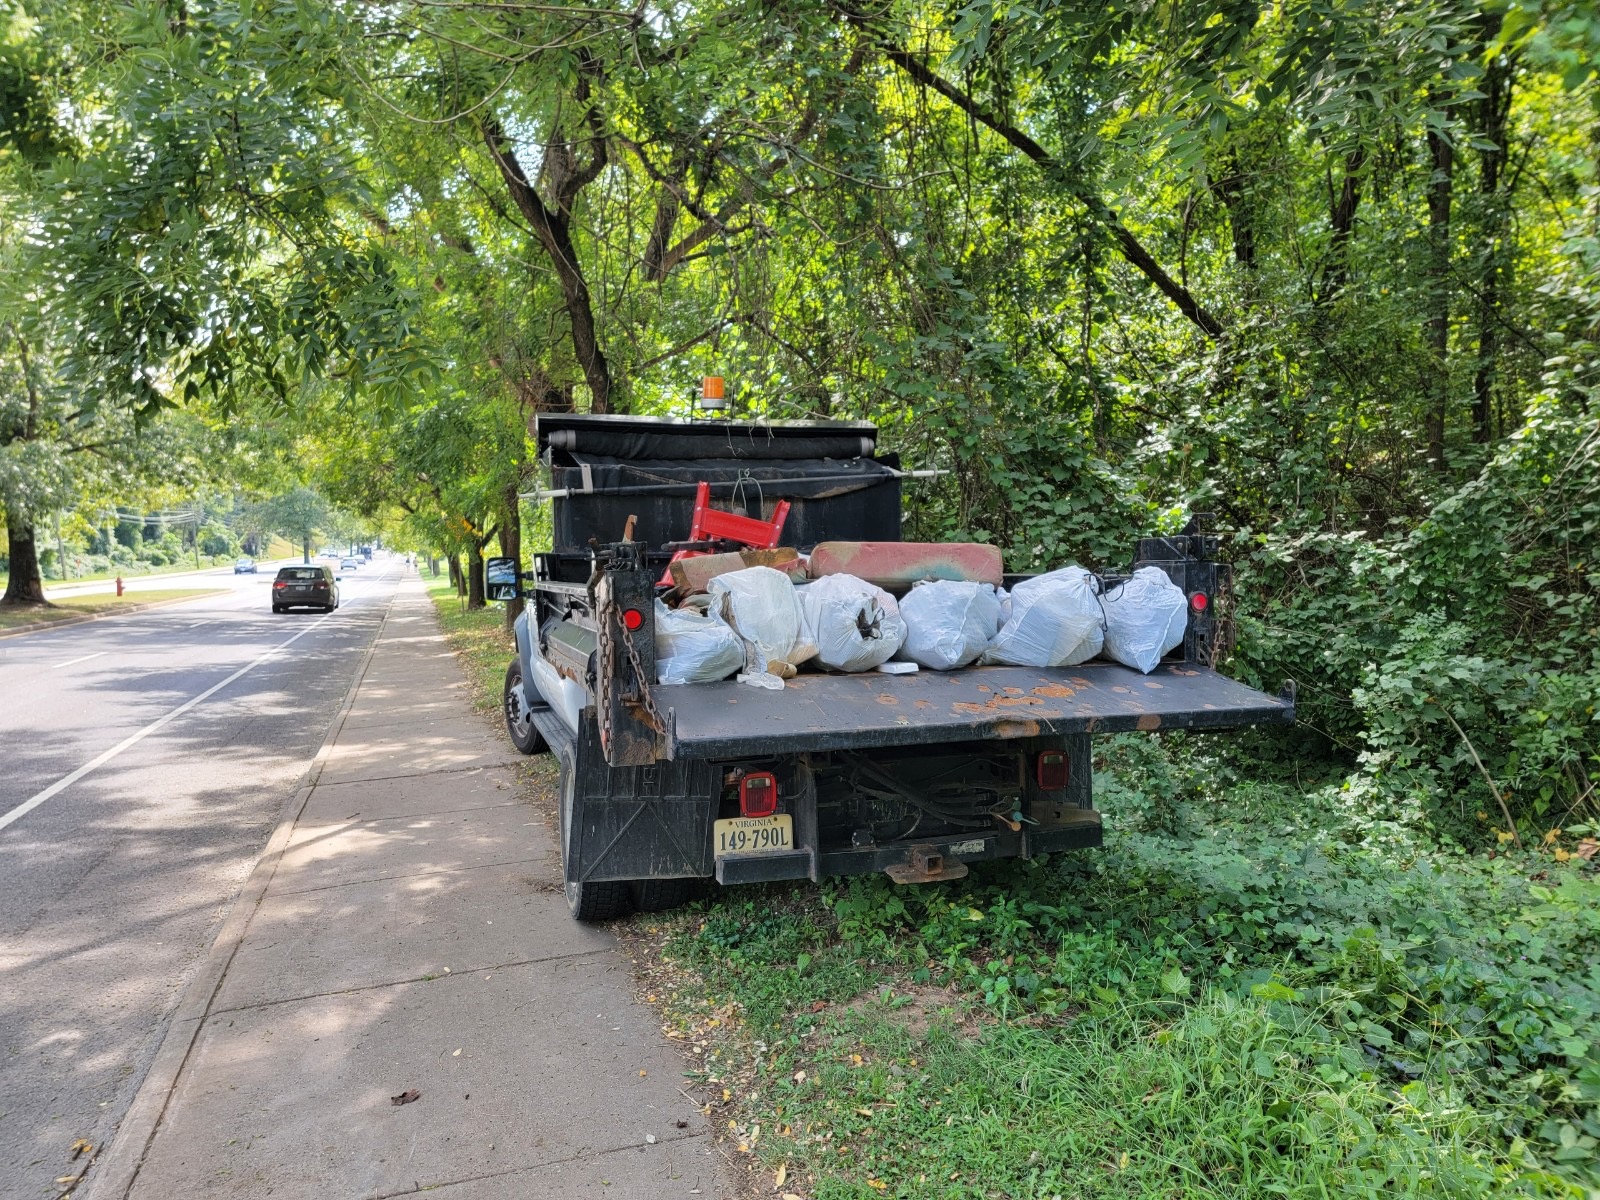 A large city-owned pickup truck is in the center of the photo, with a street and sidewalk to the left and trees, shrubs, and other vegetation to the right. The truck bed is down, and it’s full of half a dozen large plastic trash bags, pieces of a moldy couch, a wooden chair, and whatever is piled beneath them.